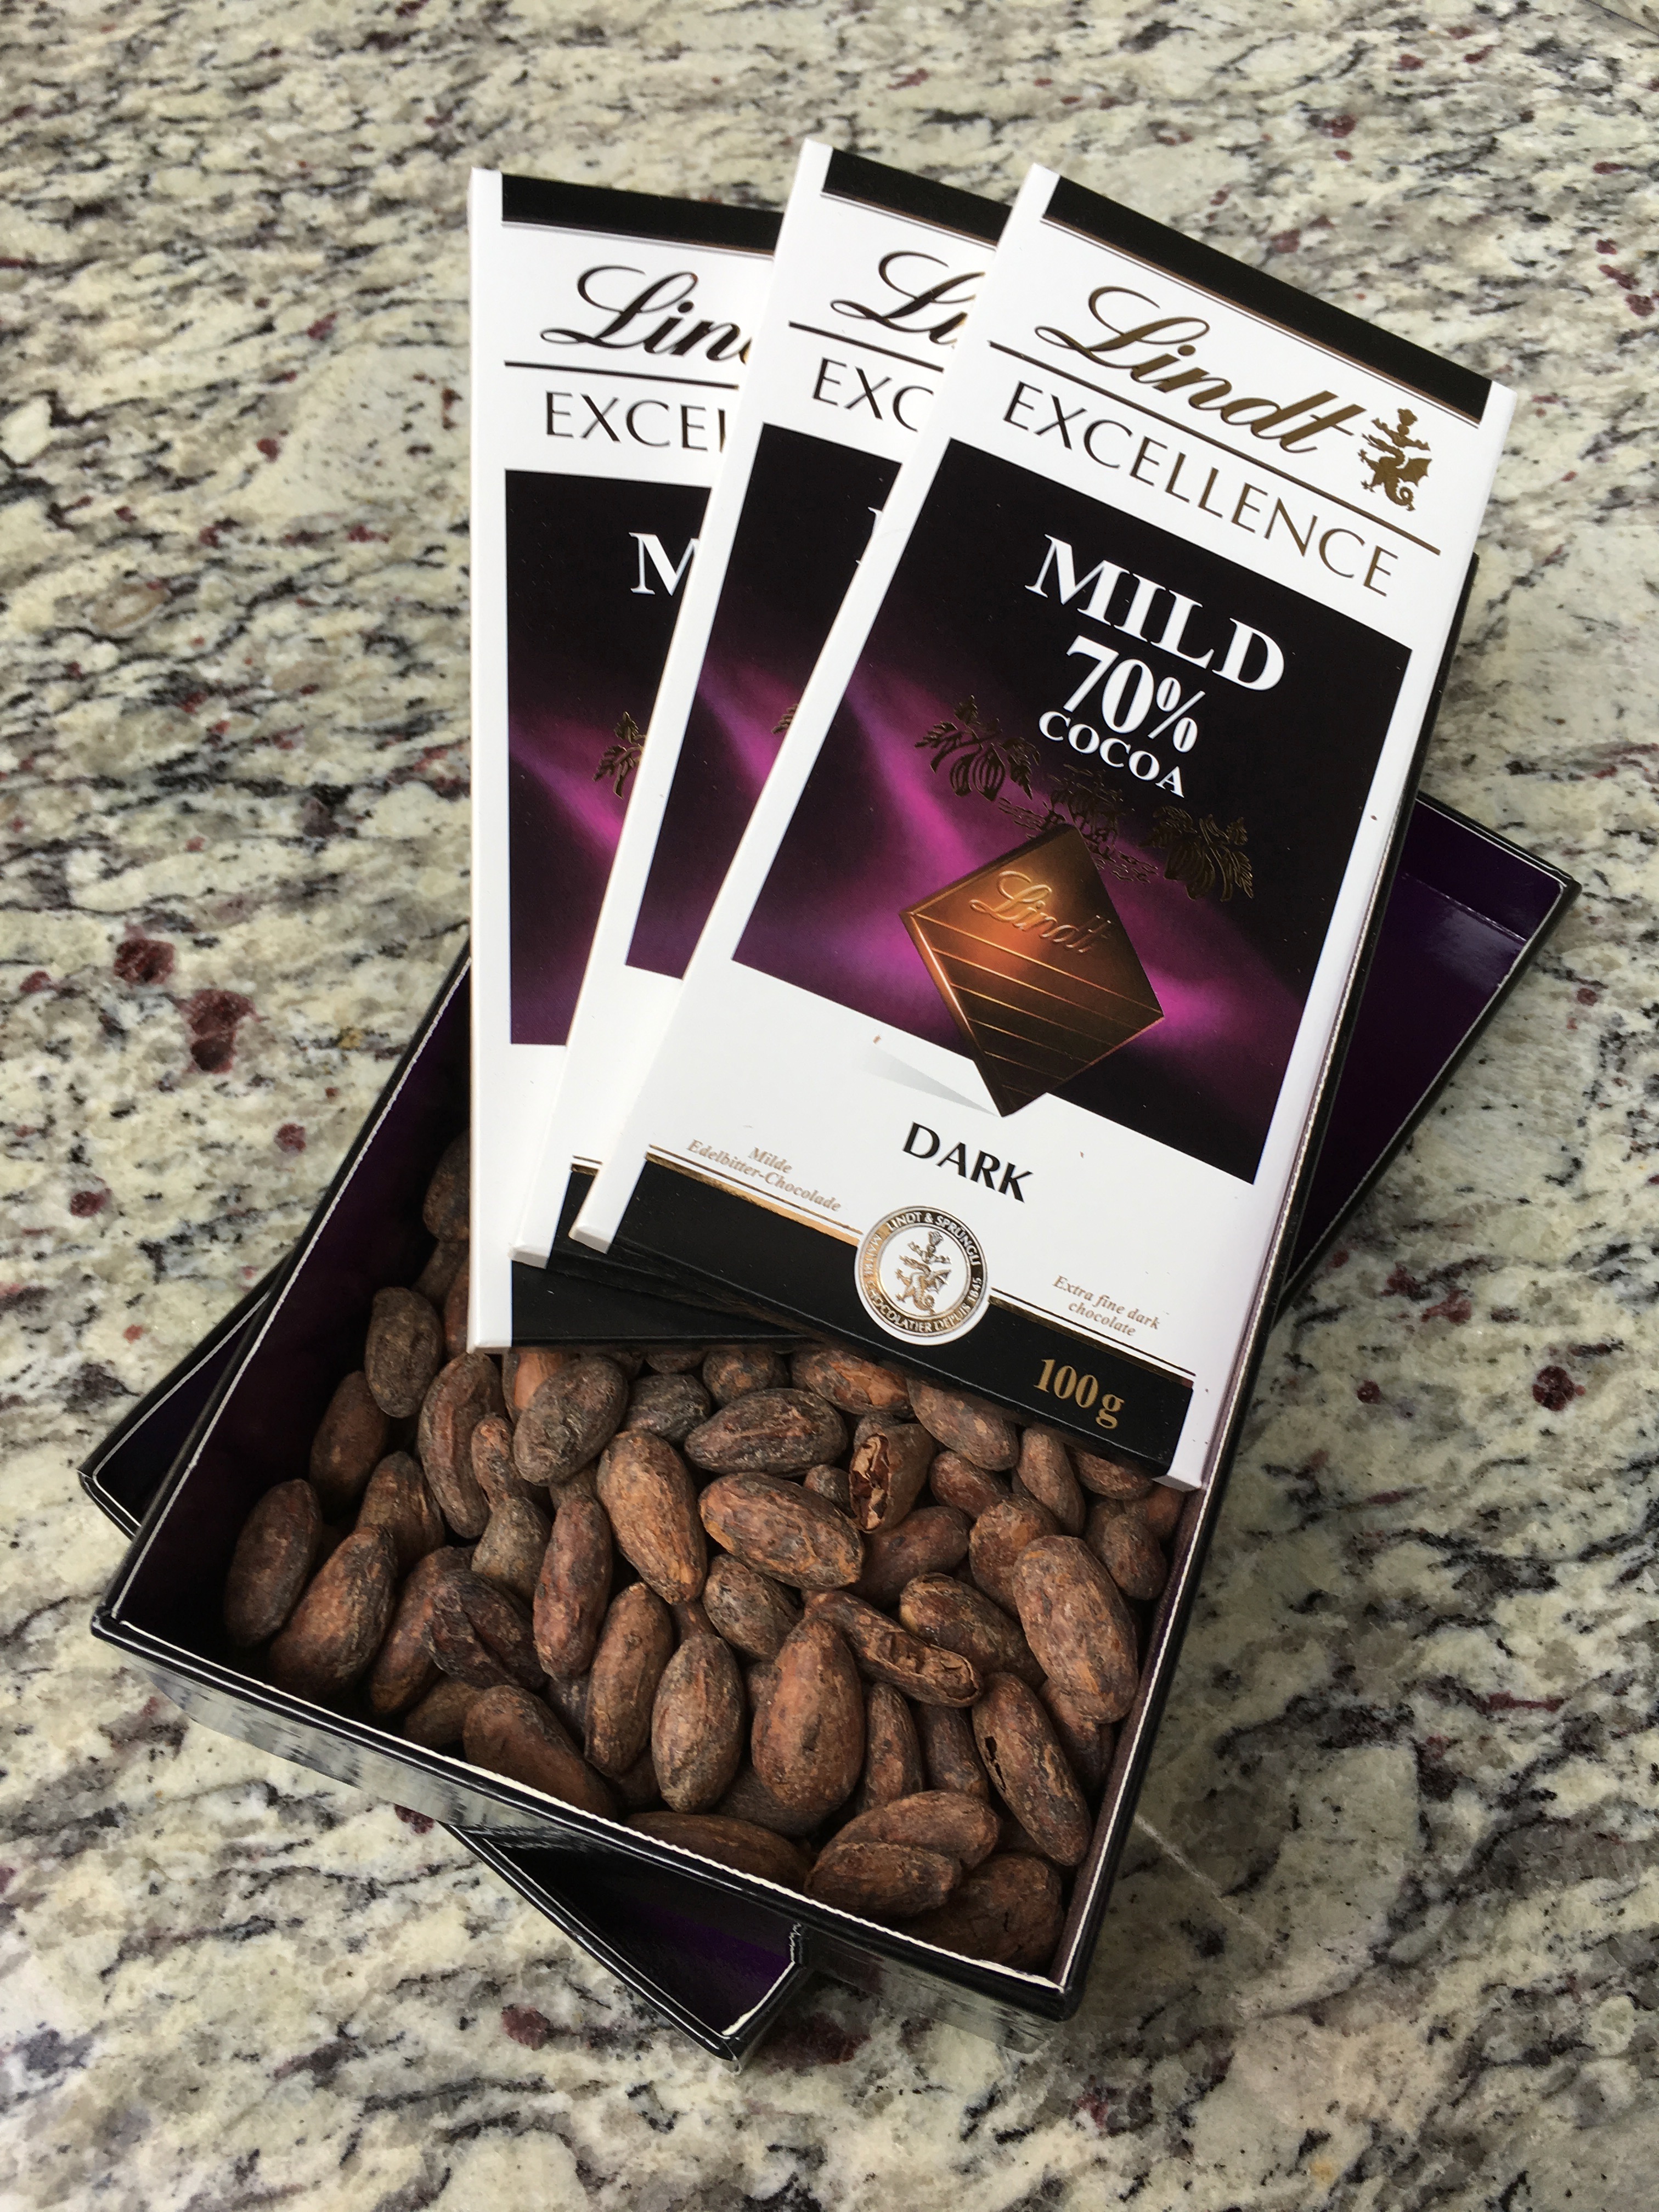 LINDT EXCELLENCE MILD 70% (photo taken with iPhone 6s)